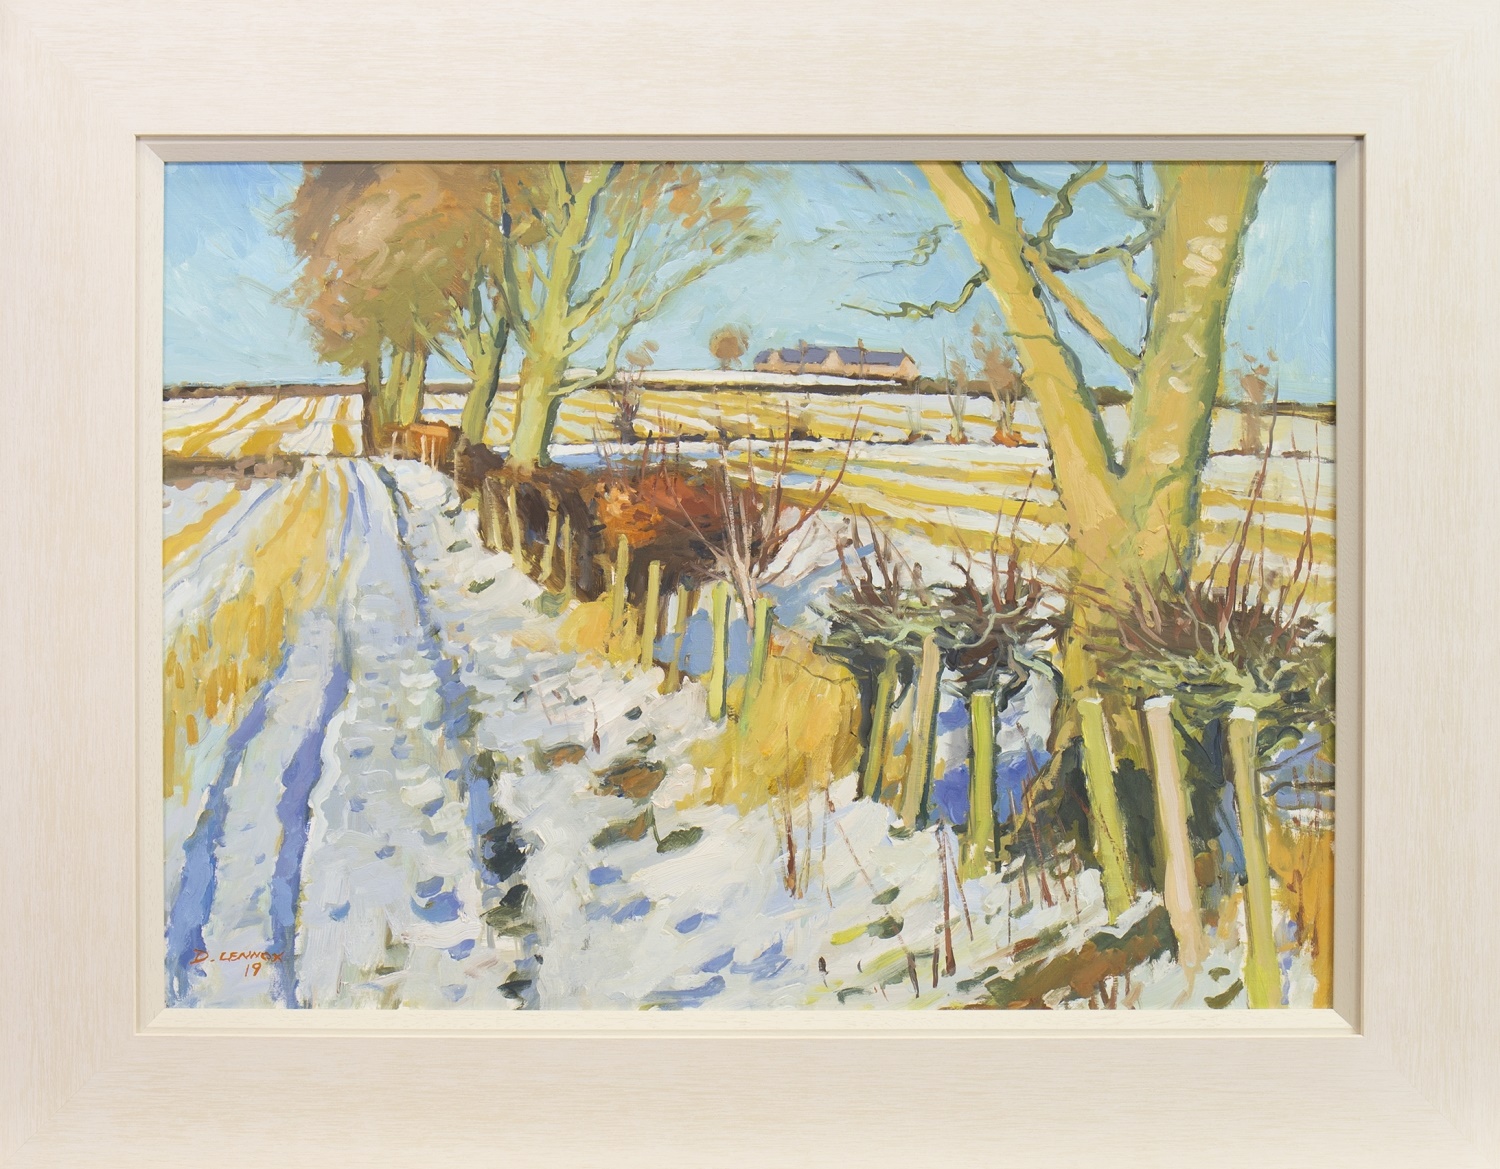 WINTER AT FOULPAPPLE, BY DOUGLAS LENNOX,